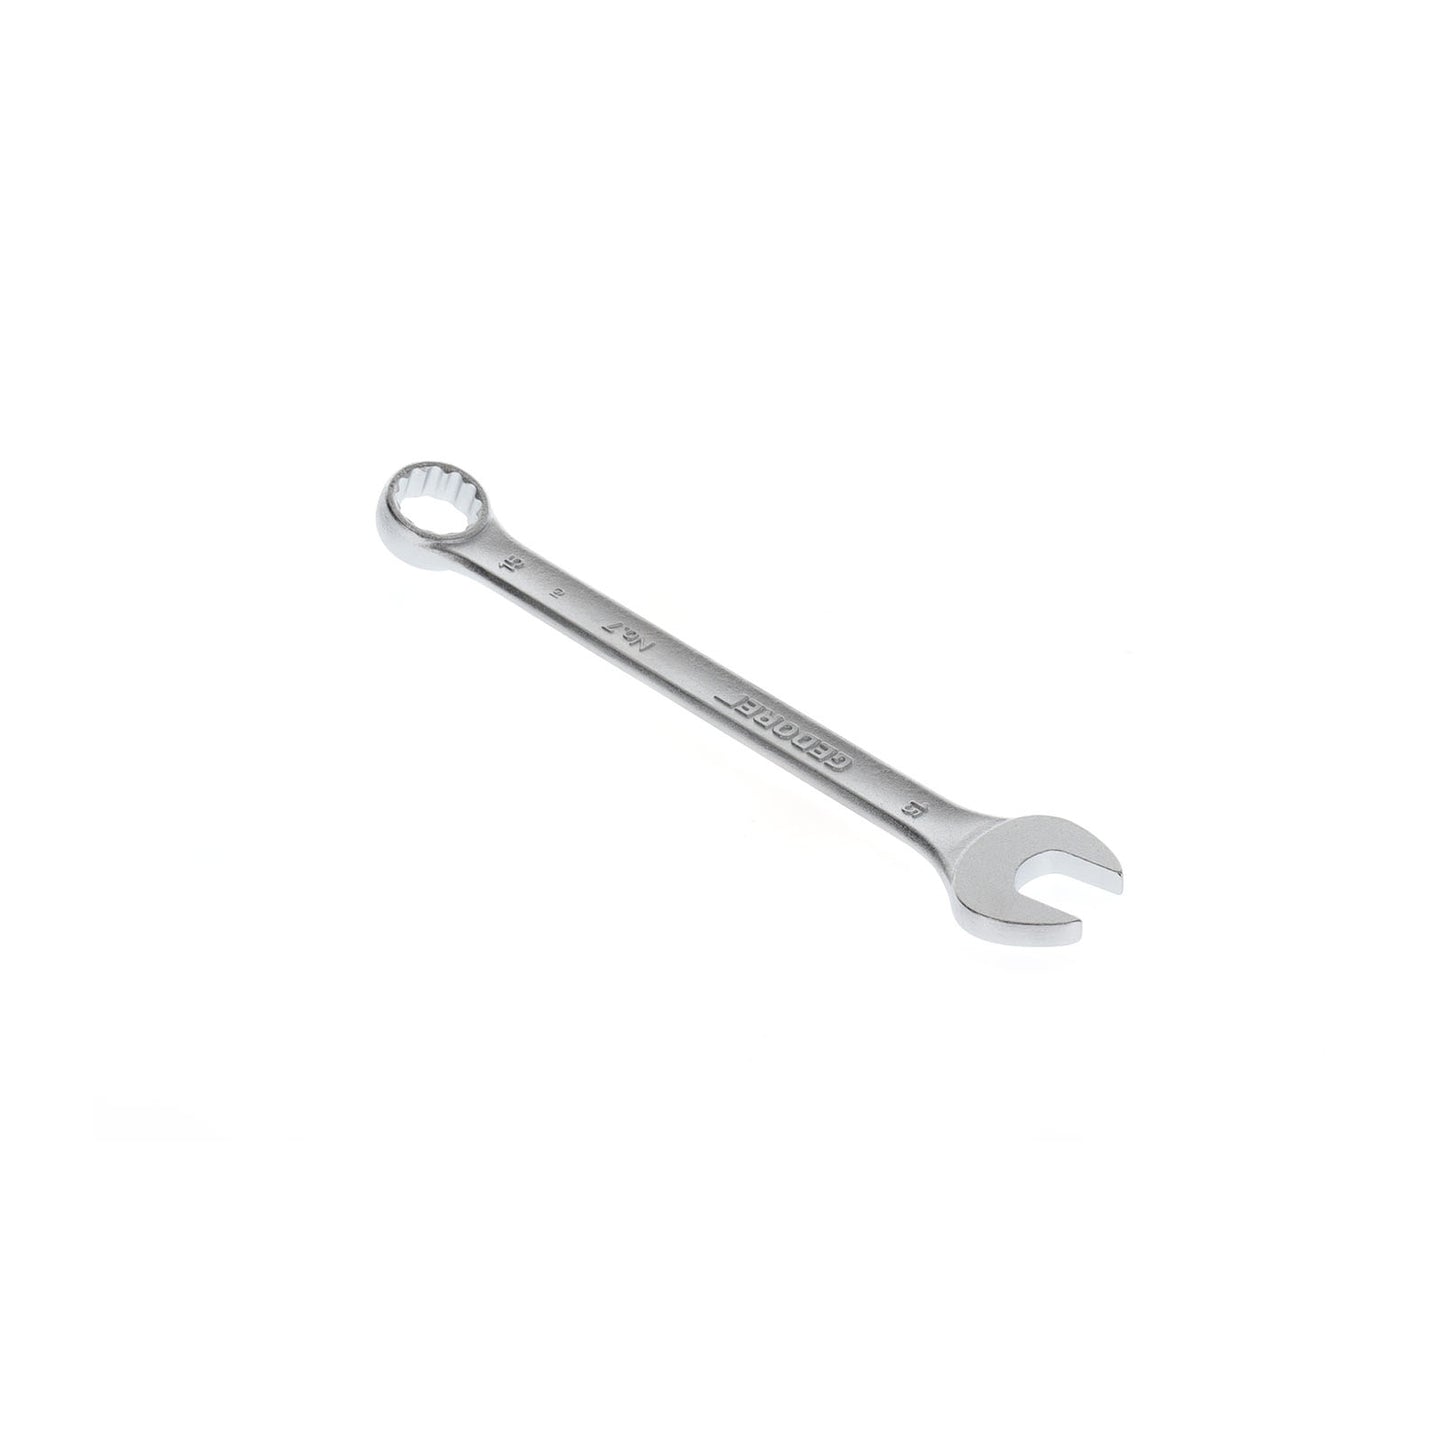 GEDORE 7 15 - Combination Wrench, 15 mm (6090640)